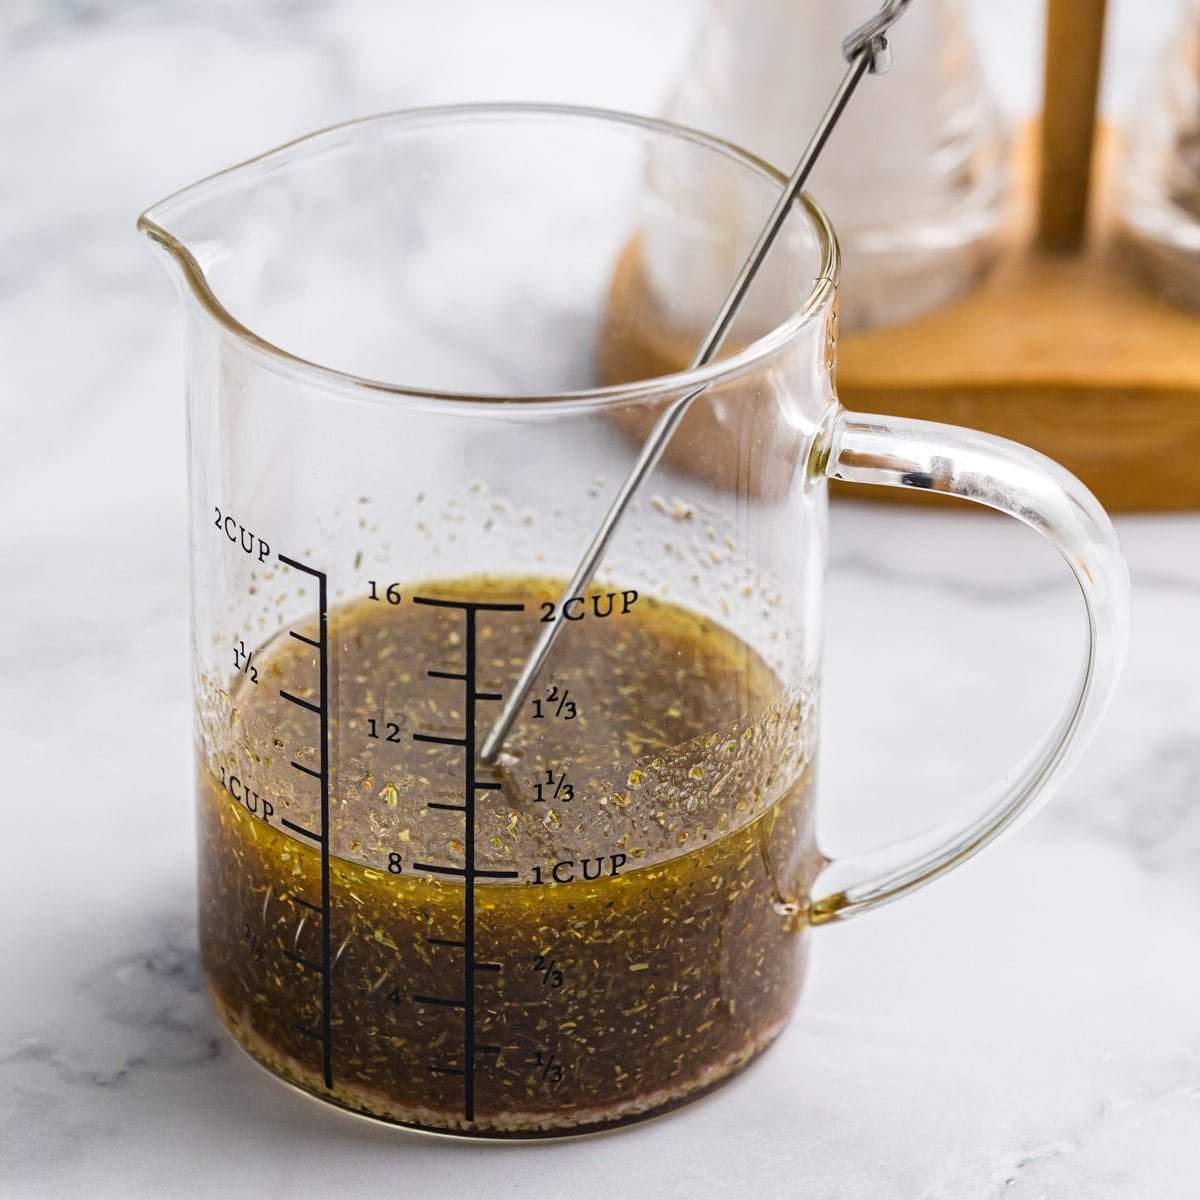 homemade vinaigrette in a measuring cup